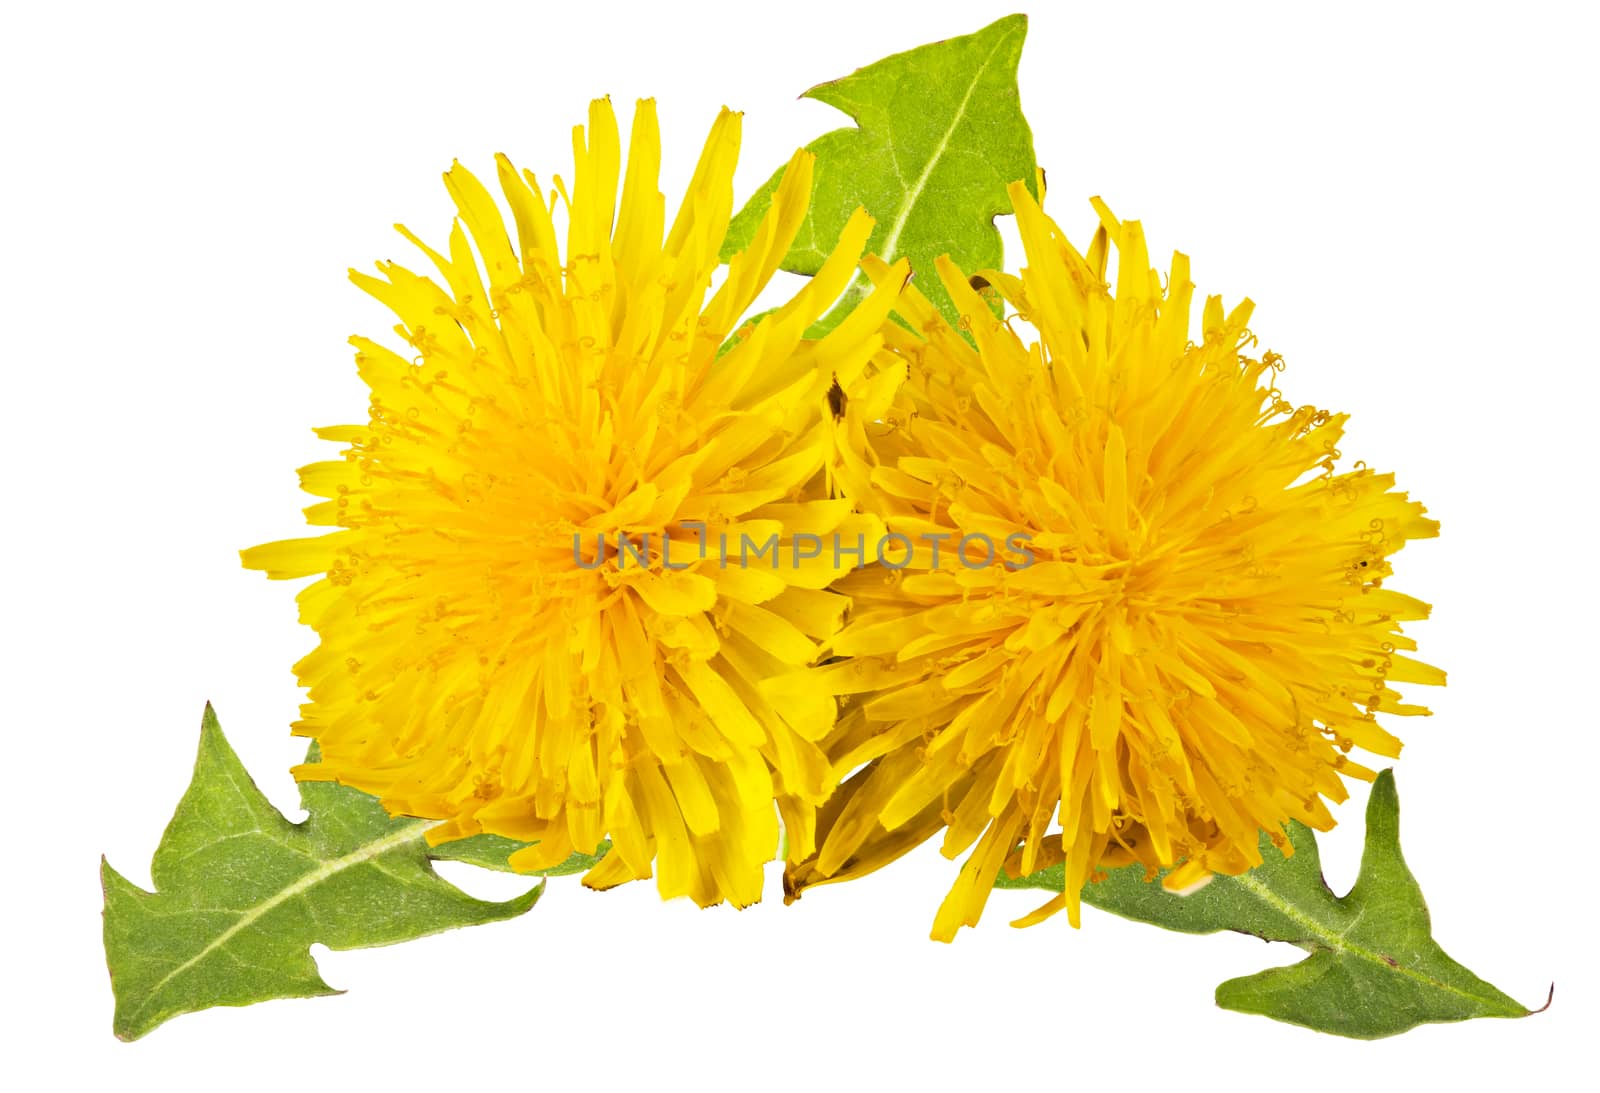 yellow dandelions with green leaves on a white background